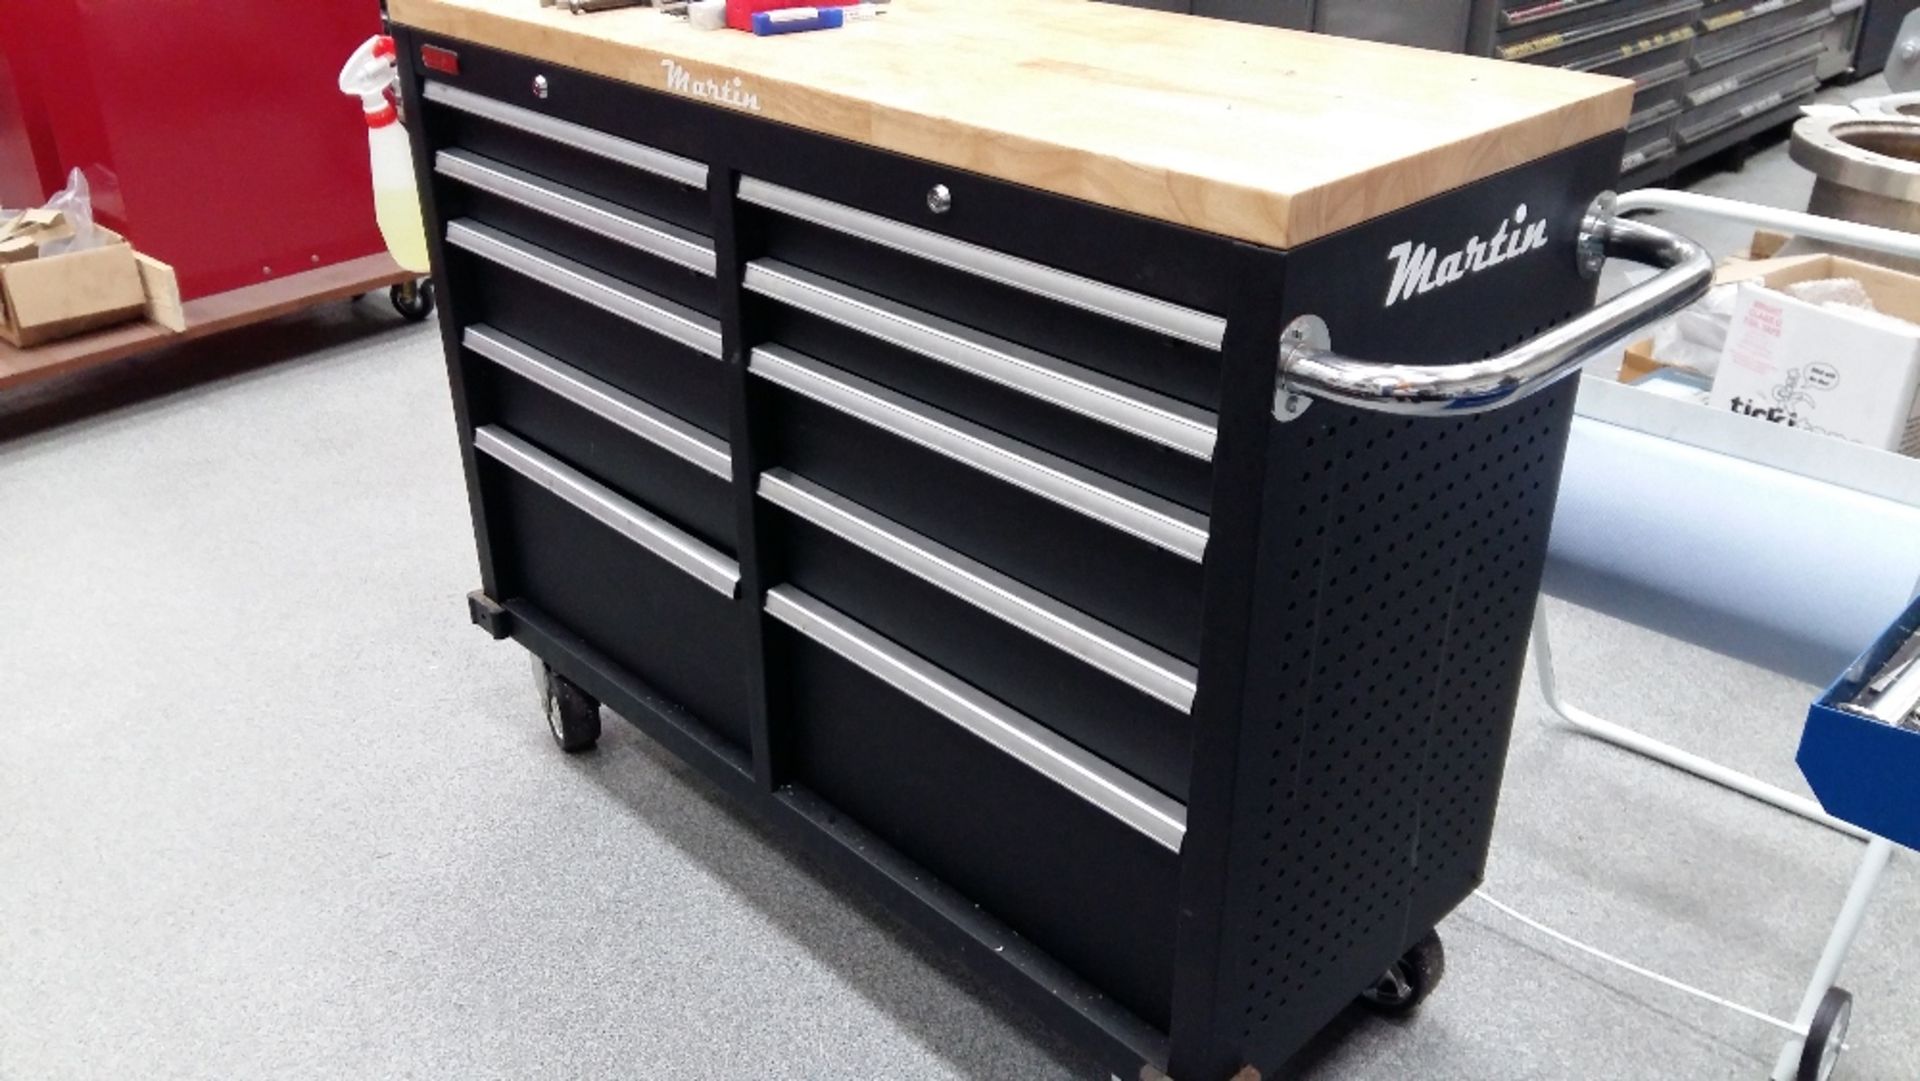 CSPS mobile 10-drawer tool cabinet with tooling contents for Hurco VMX64 - Image 2 of 12